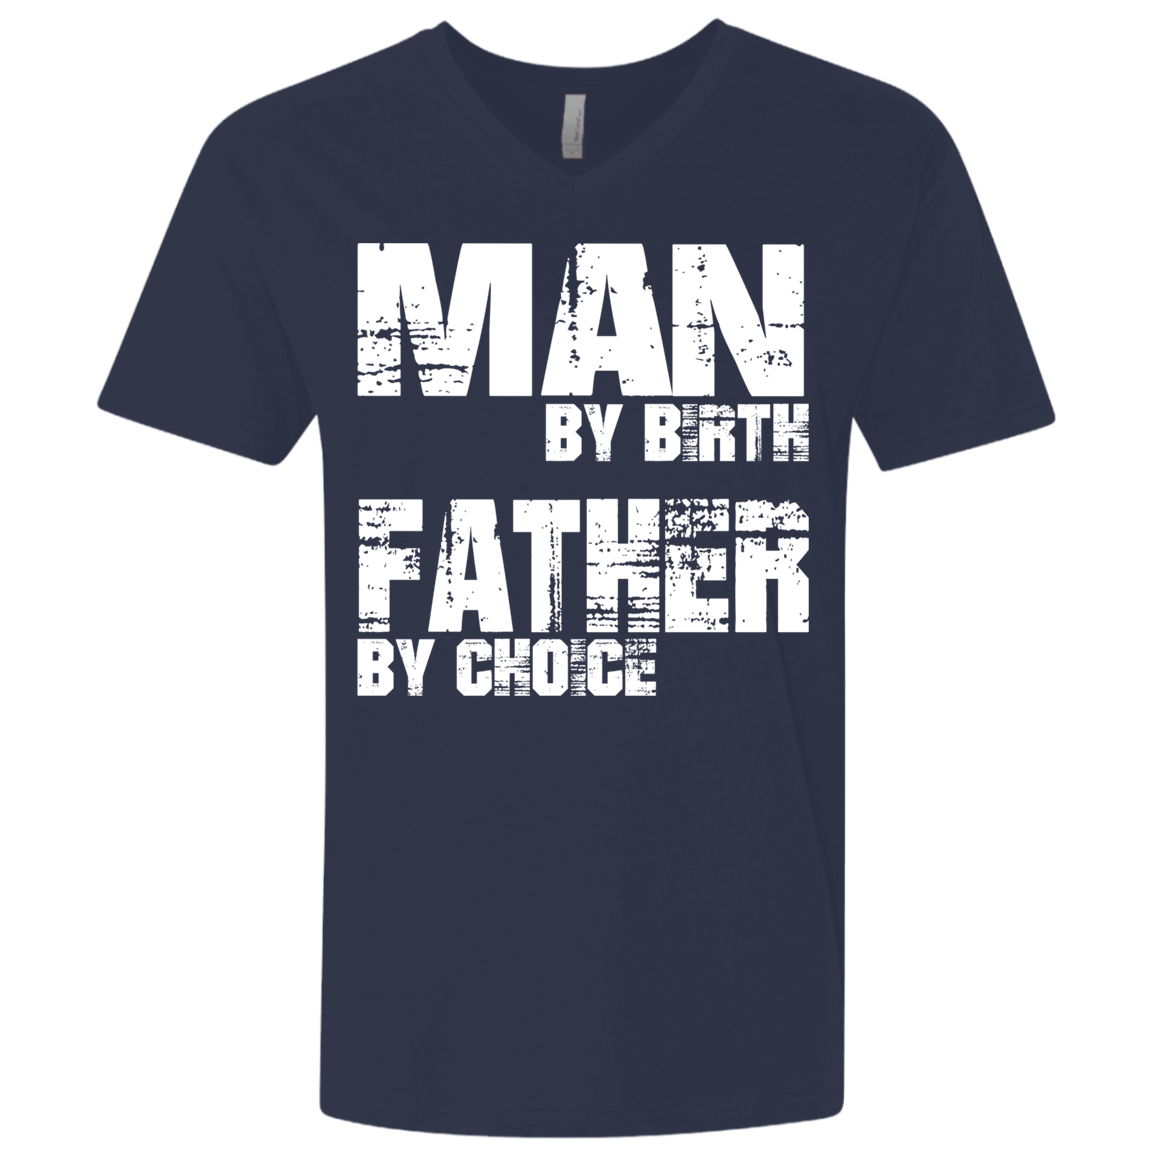 Father By Choice Premium Fitted SS V-Neck